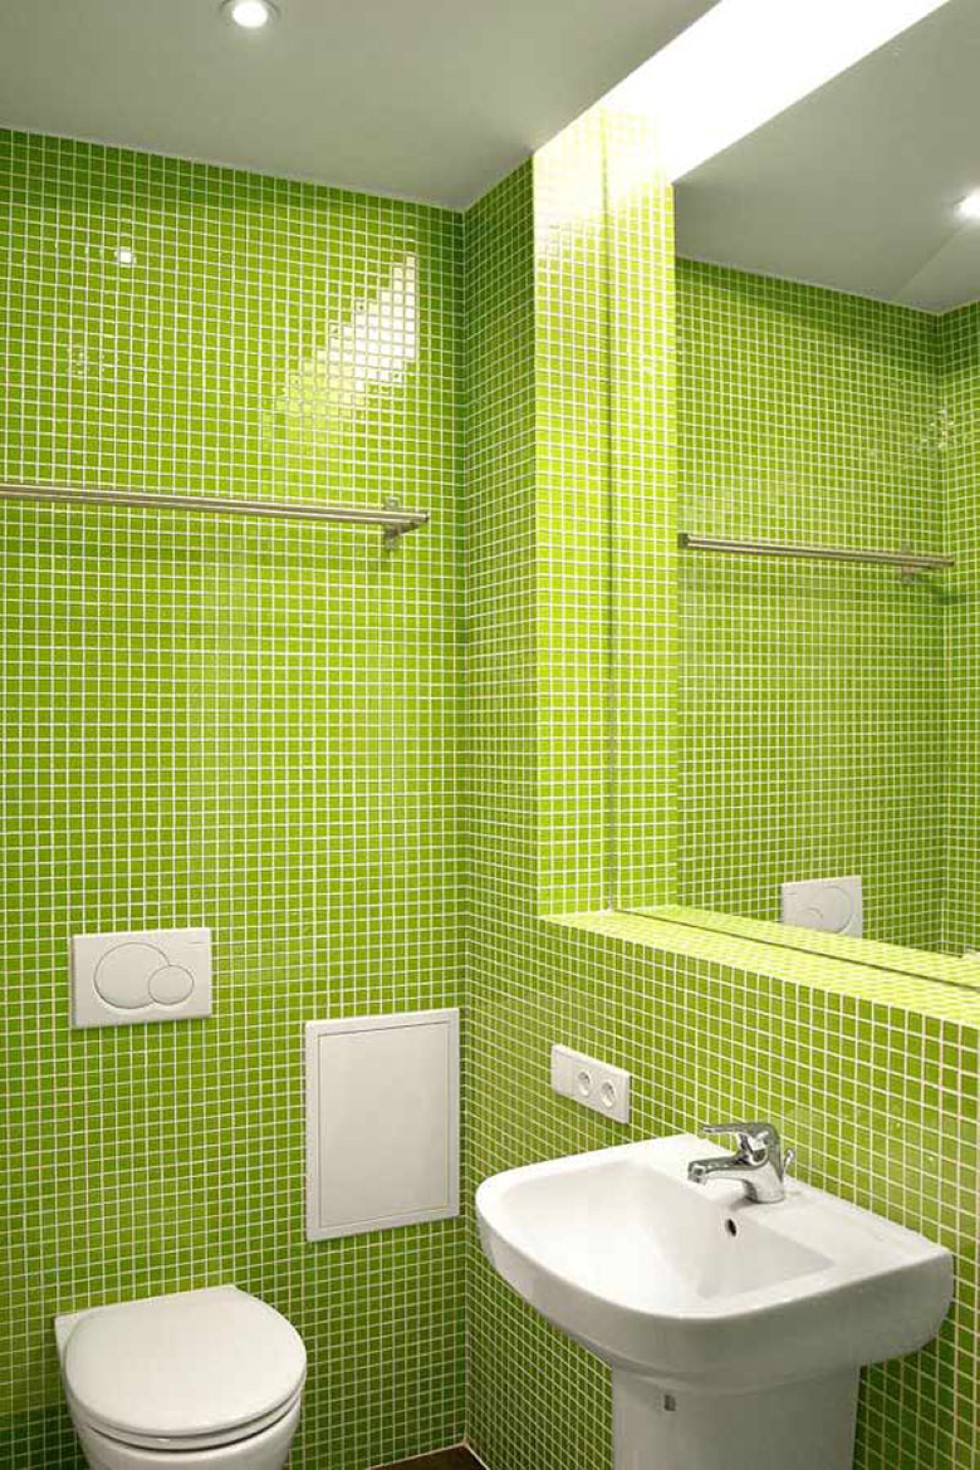 Green Wall Pedestal Beautiful Green Wall Tile Also Pedestal Sink Design And One Piece Toilet In Captivating Apartment Bathroom Idea Apartment Modern Minimalist Apartment Bathroom Interior Design With Free Standing Bathtub